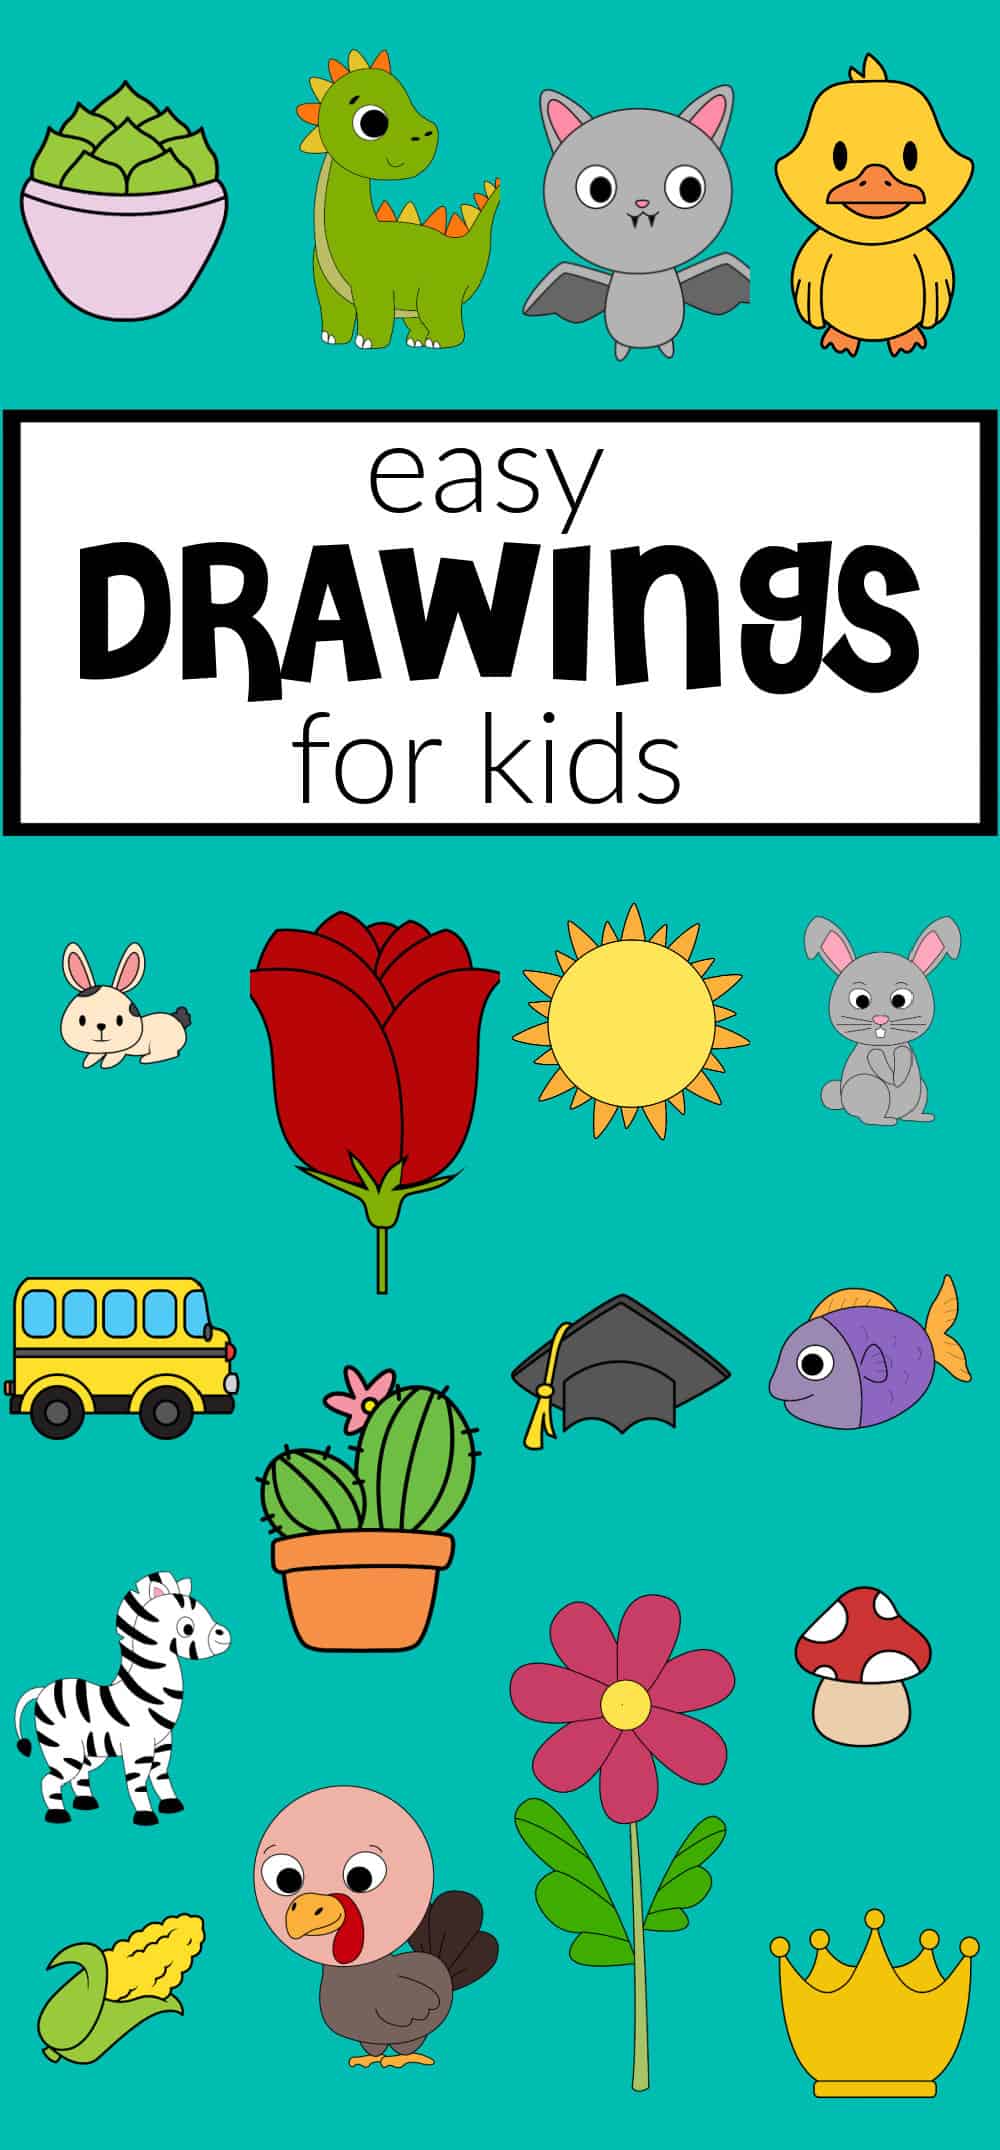 Drawing for kids - Things to draw for kids - Easy drawings easy-saigonsouth.com.vn